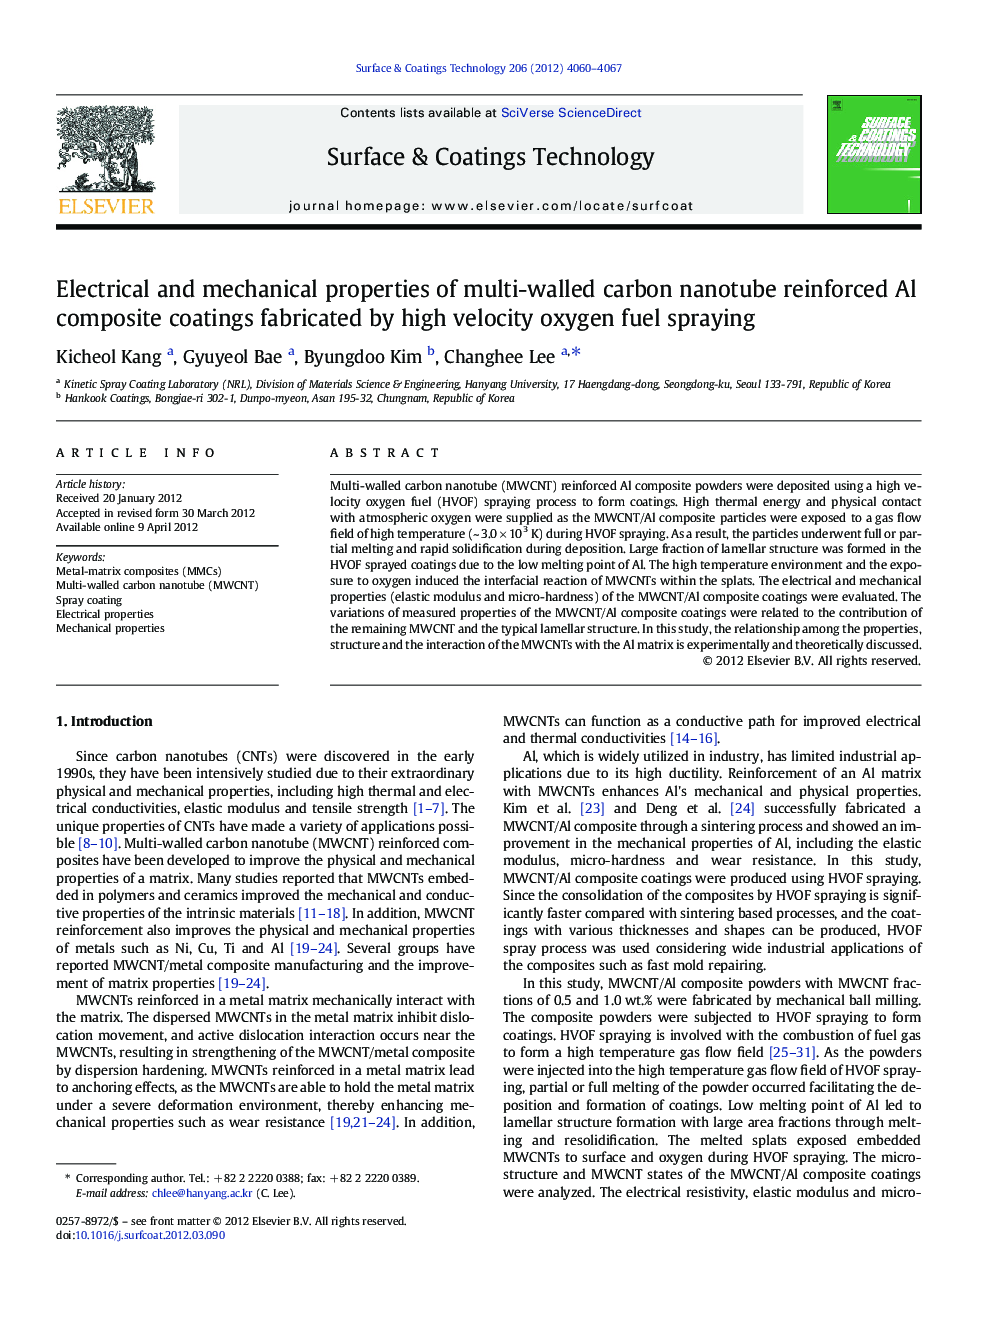 Electrical and mechanical properties of multi-walled carbon nanotube reinforced Al composite coatings fabricated by high velocity oxygen fuel spraying